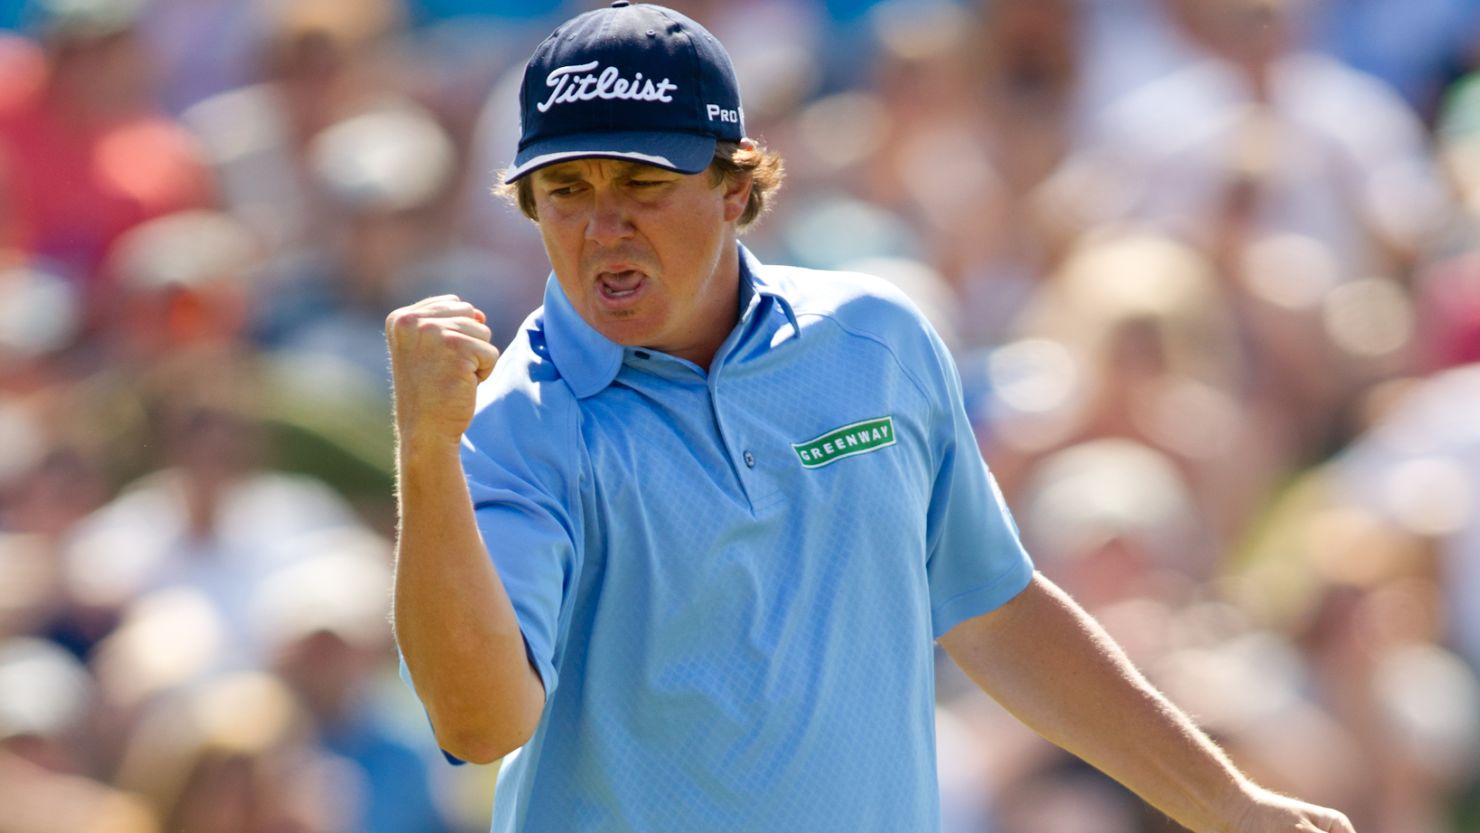 American golfer Jason Dufner rose to a career-high 14th in the world rankings after winning the HP Byron Nelson Championship.